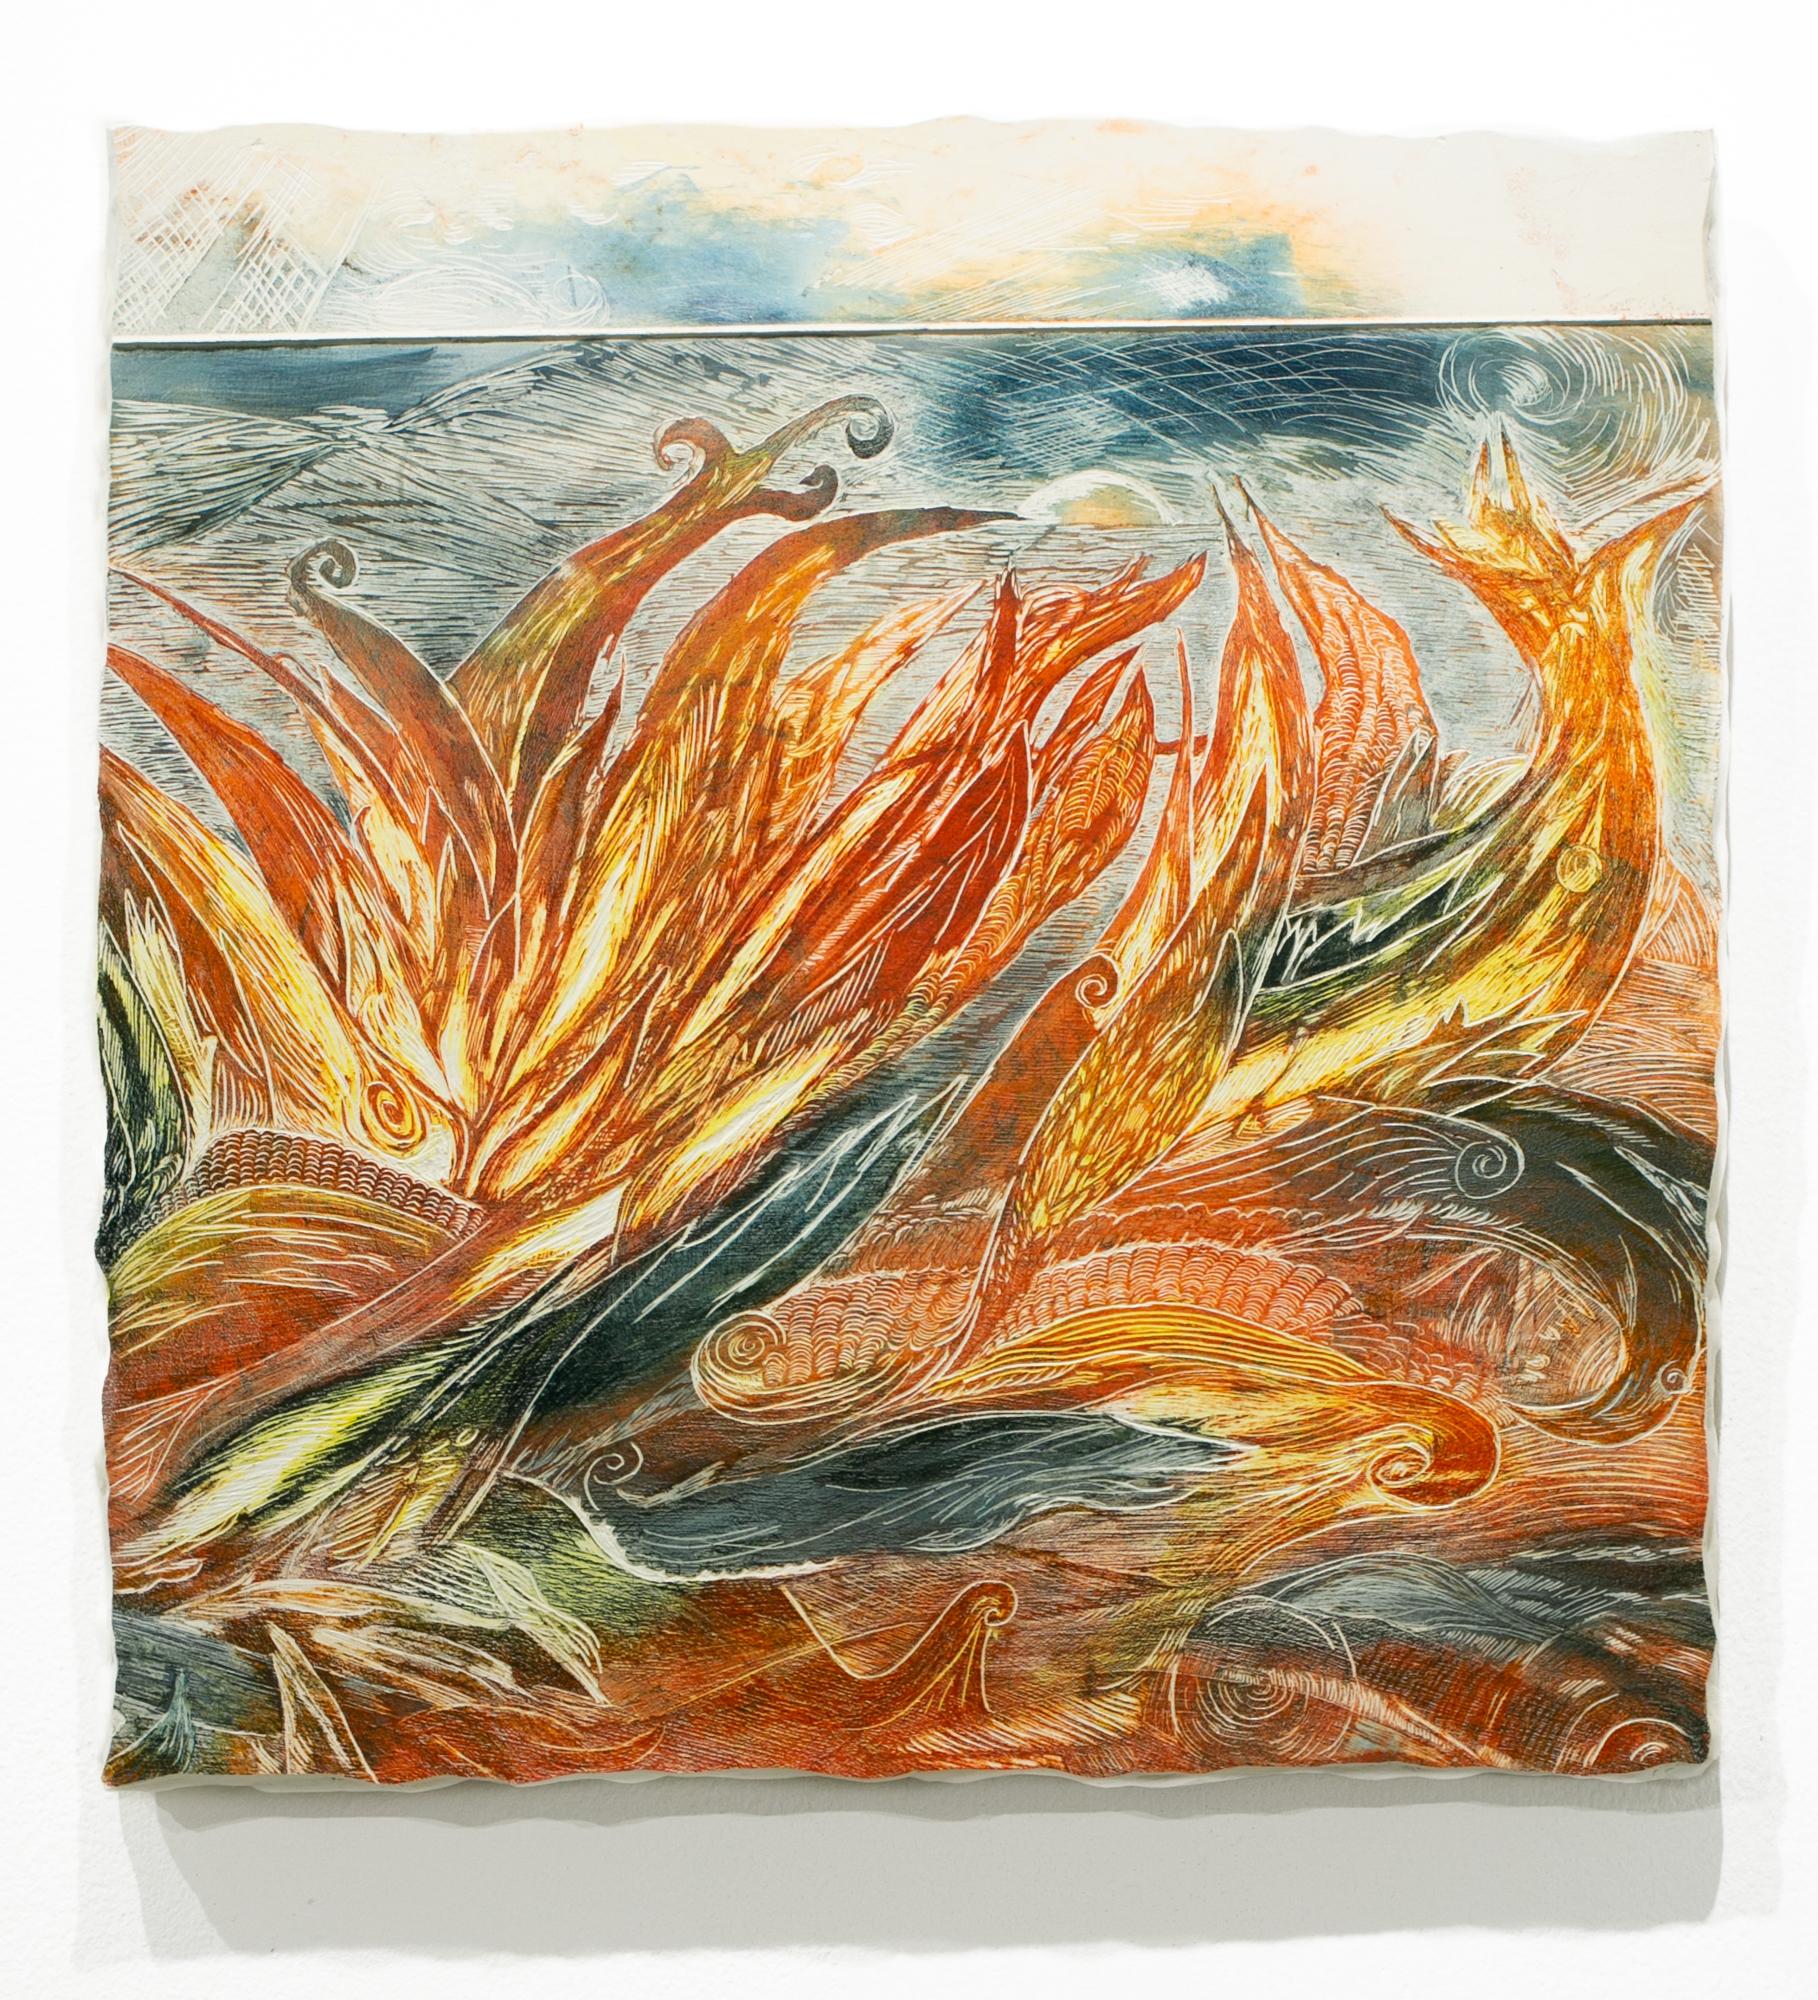 "Wild is the Wind", Warm Colors, Orange, Abstracted Landscape, Intaglio Print